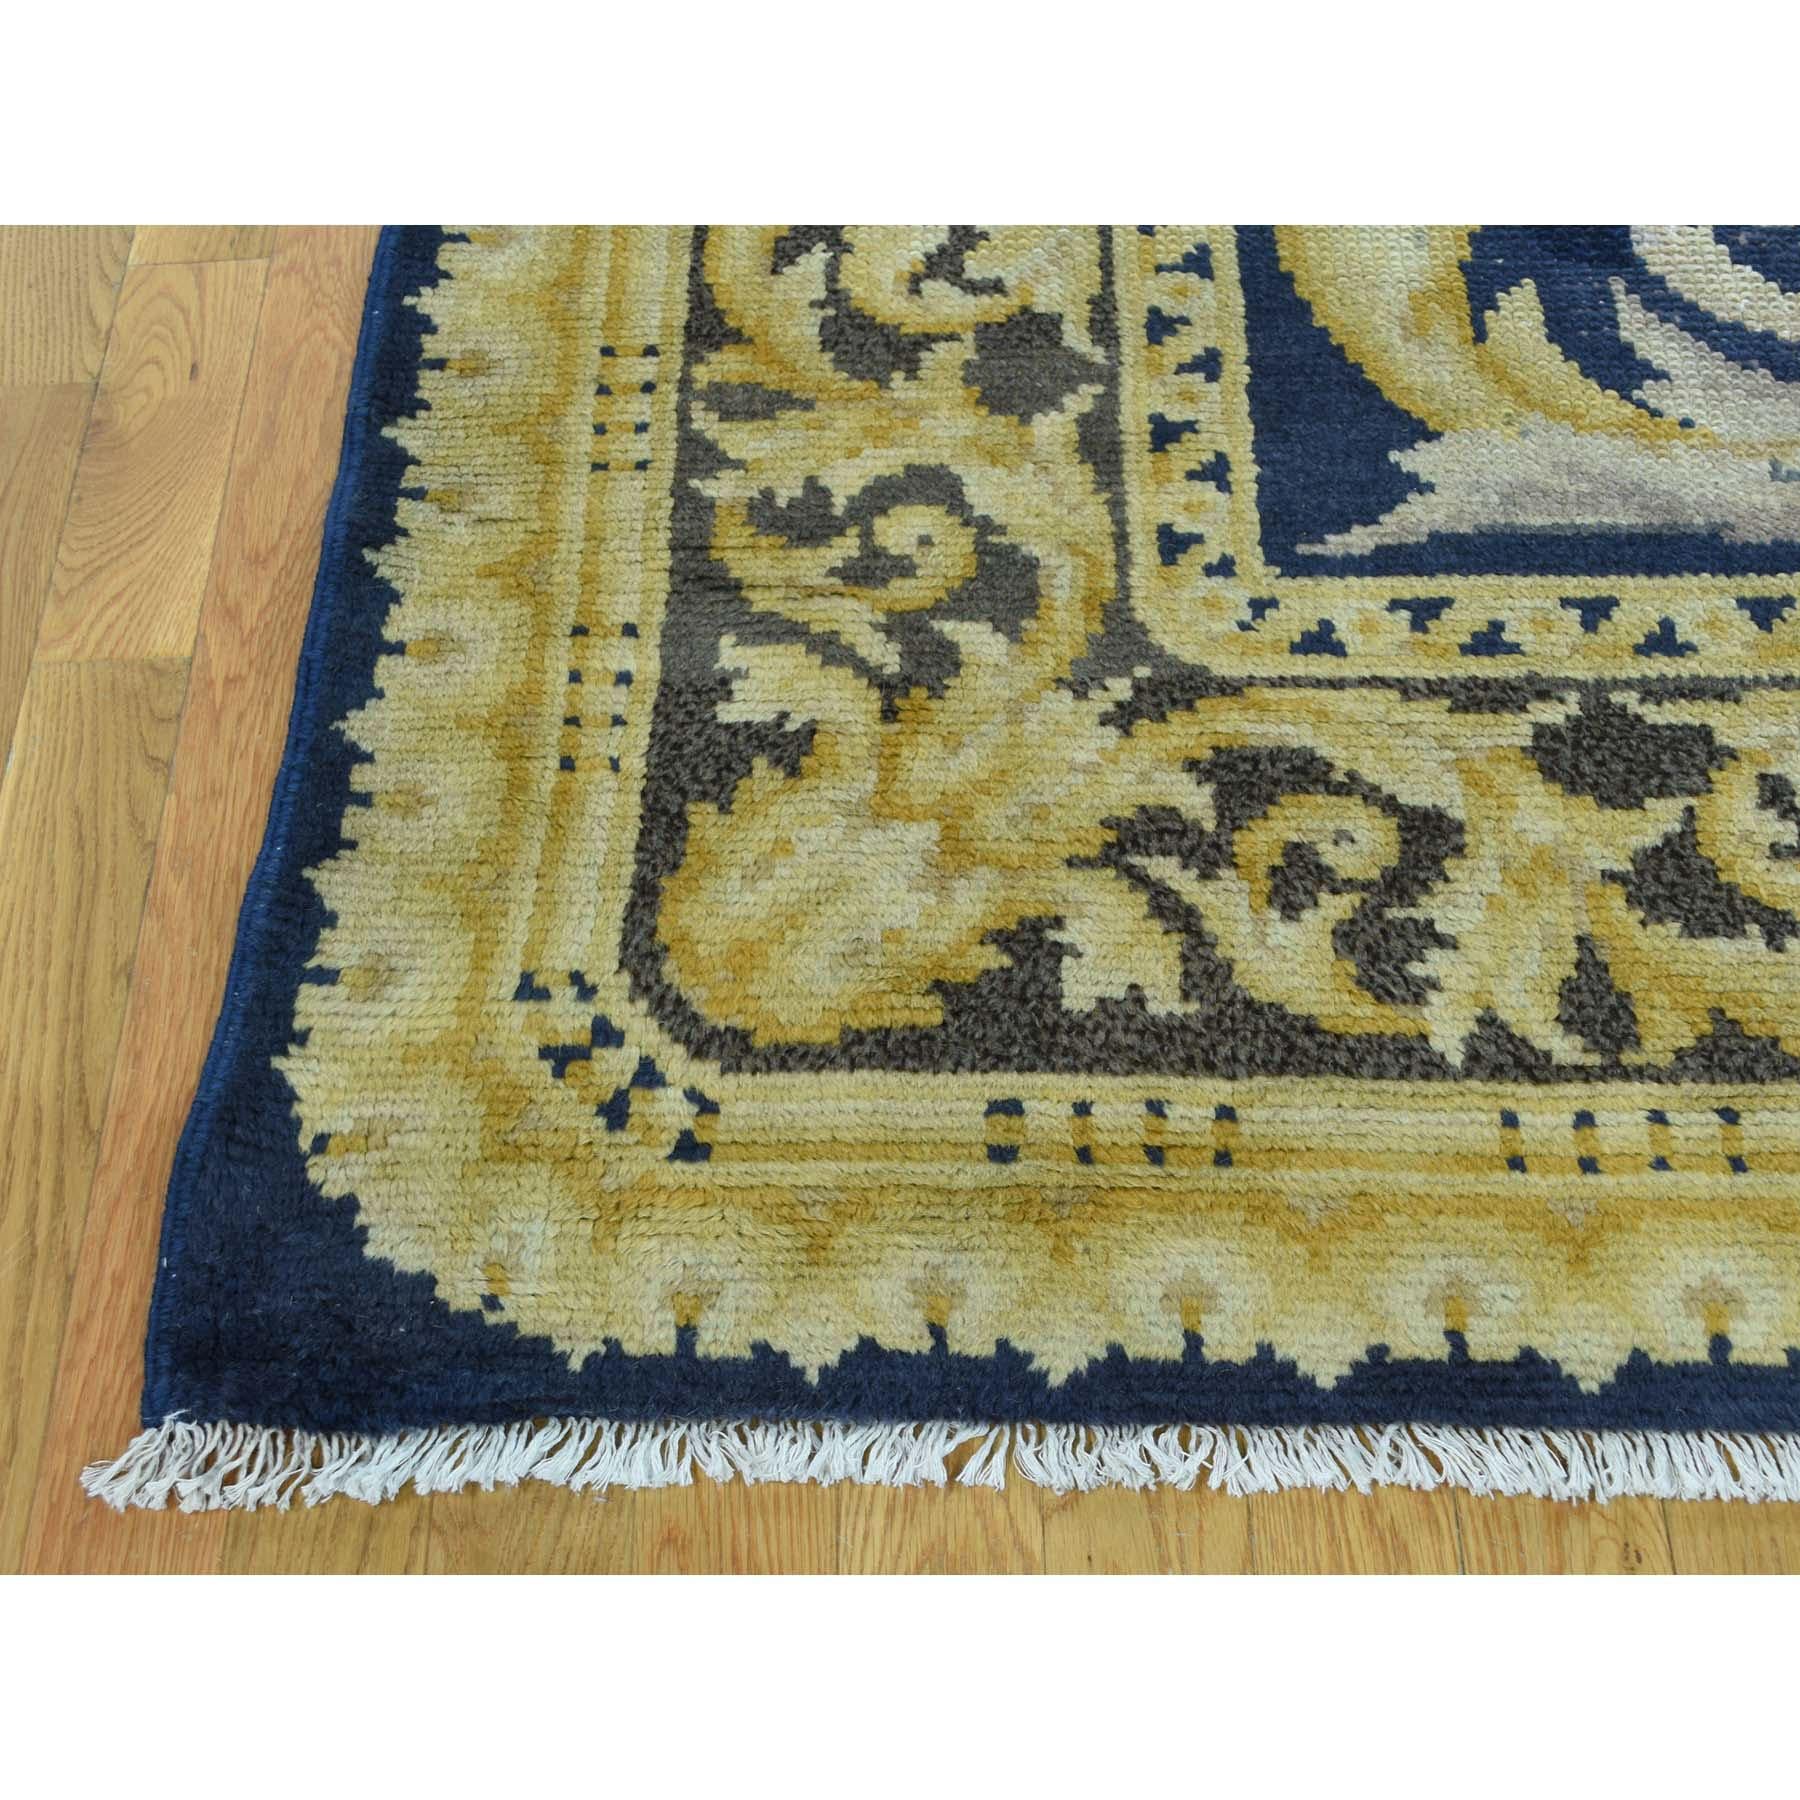 Old Spanish Savonnerie Exc Cond Hand-Knotted Oversize Rug In Good Condition For Sale In Carlstadt, NJ